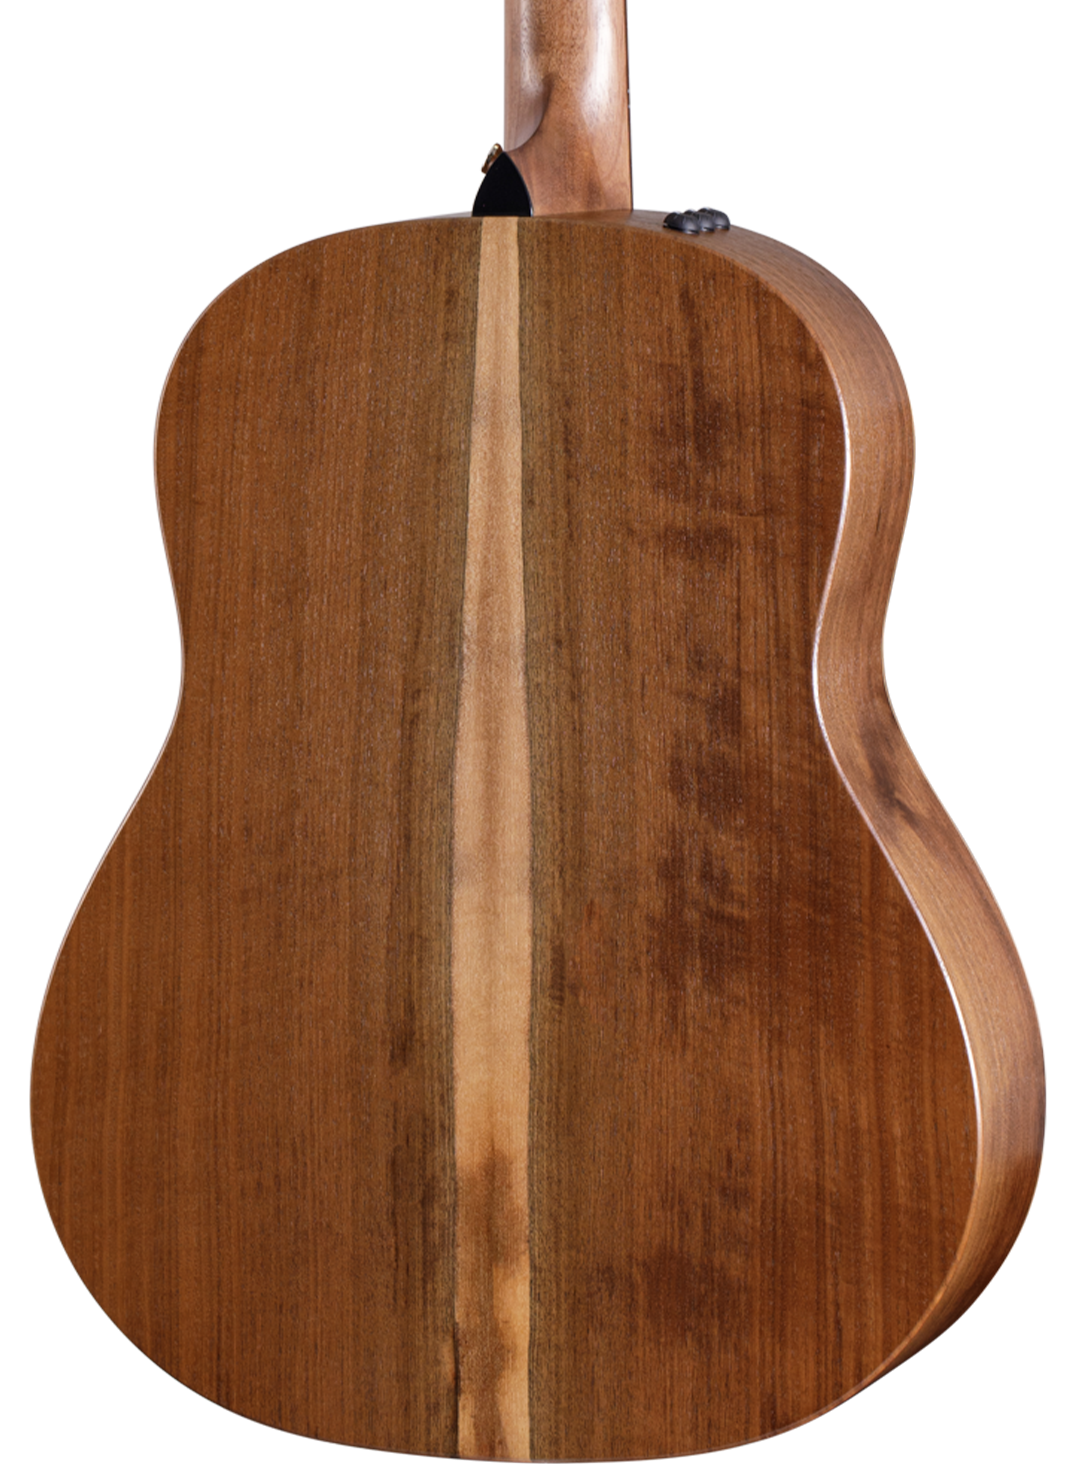 taylor-features-body-woods-walnut-ad17e